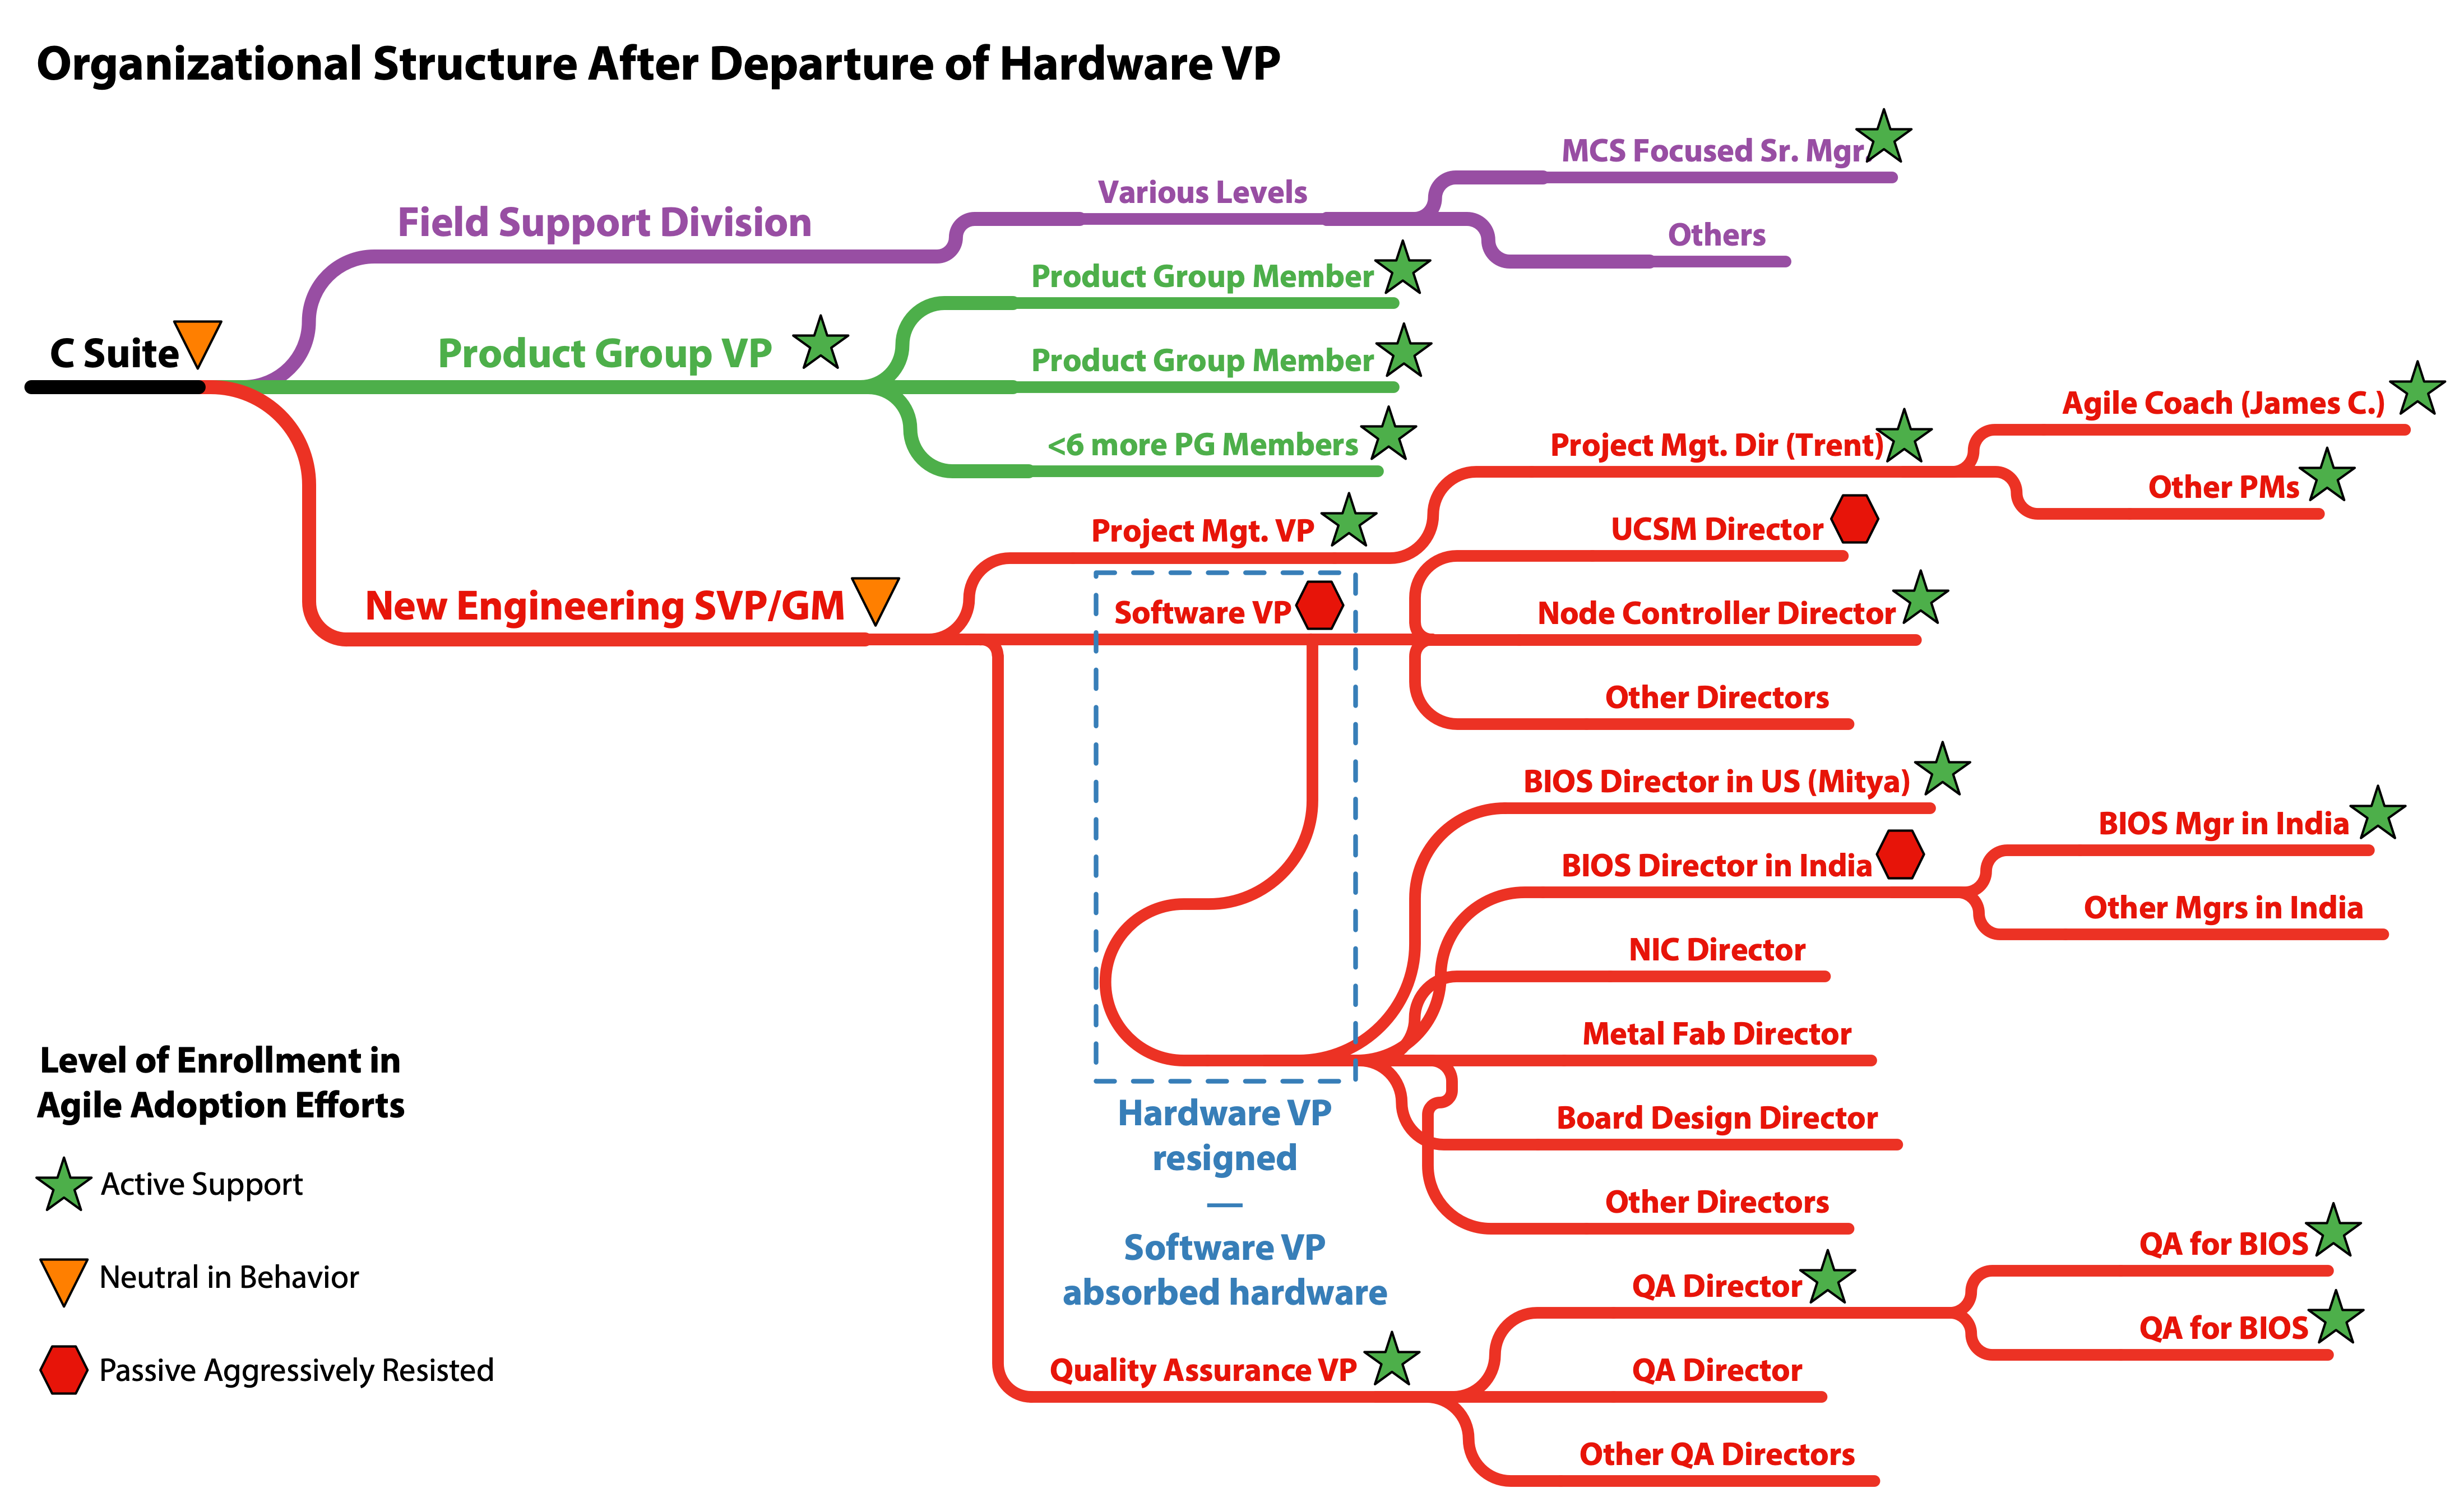 Organizational Structure After Depature of Hardware VP